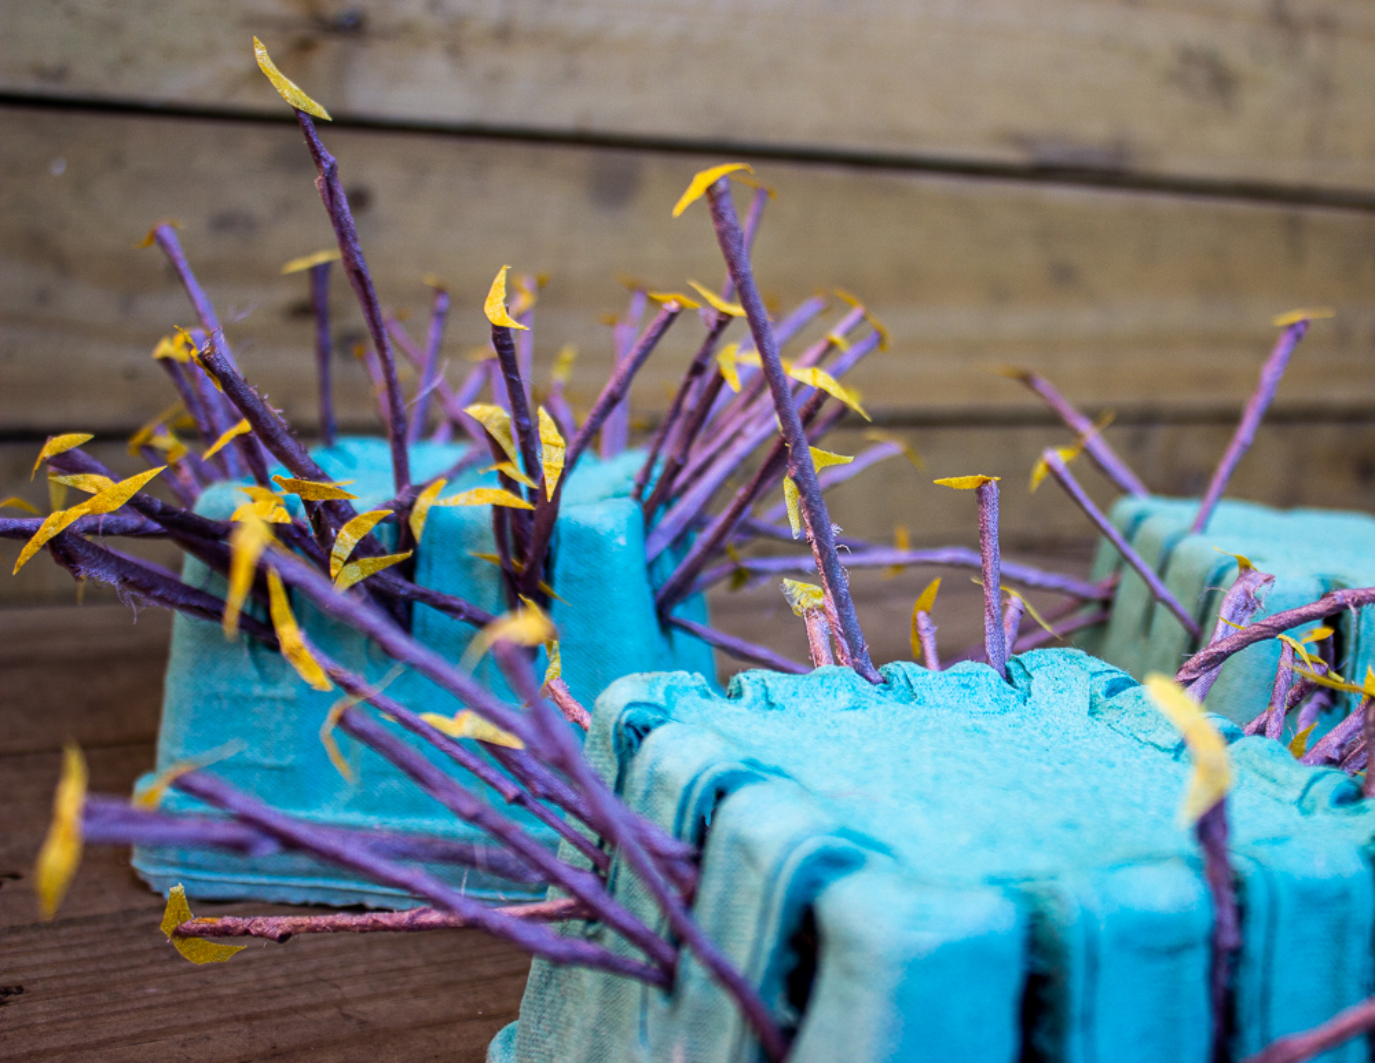 A close up image of purple sticks and yellow flowers sticking out from upside down blue boxes. There are wood slats in the background.